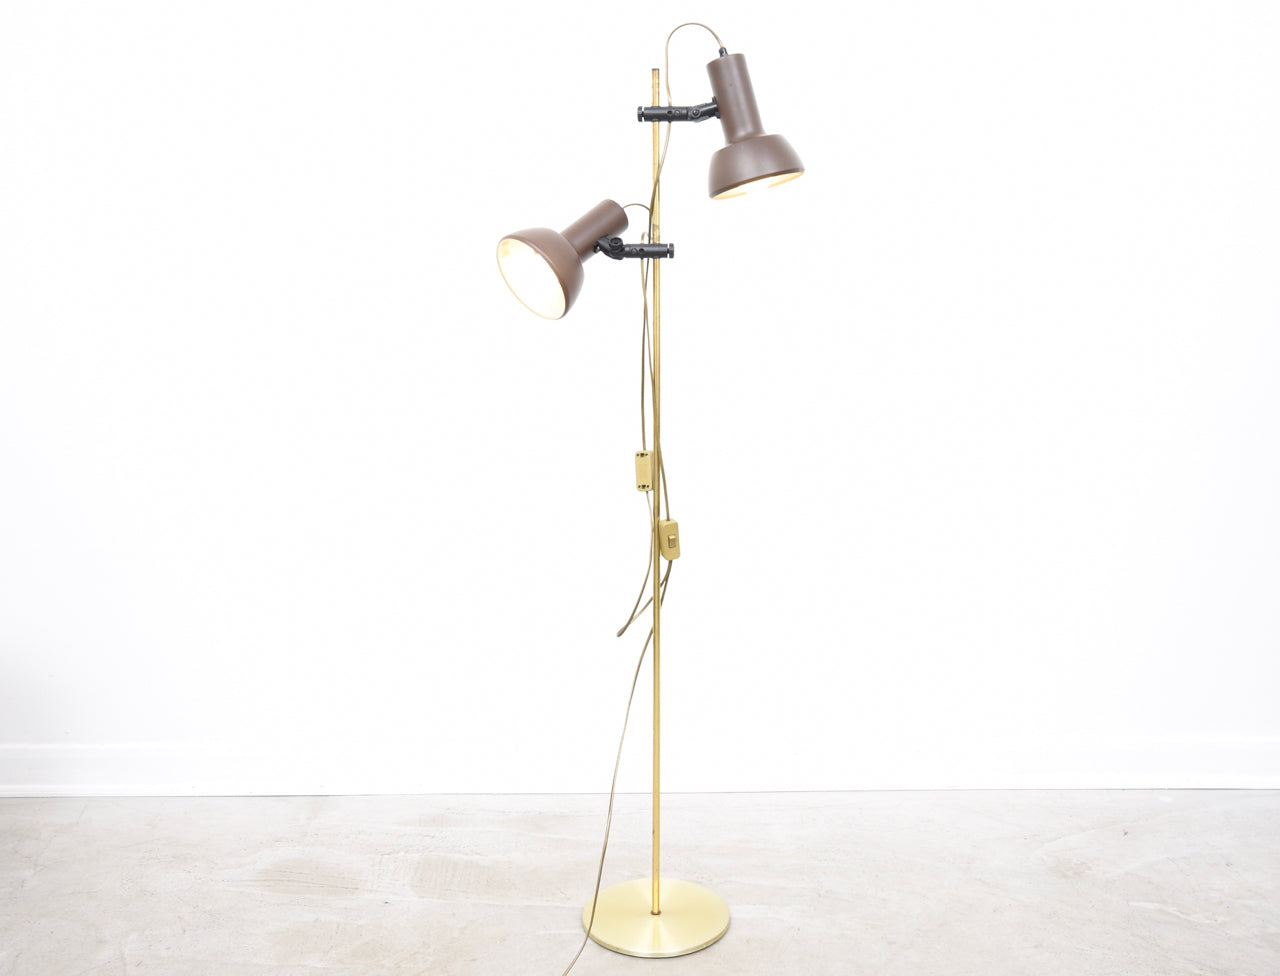 Twin-headed vintage floor lamp with brown shades